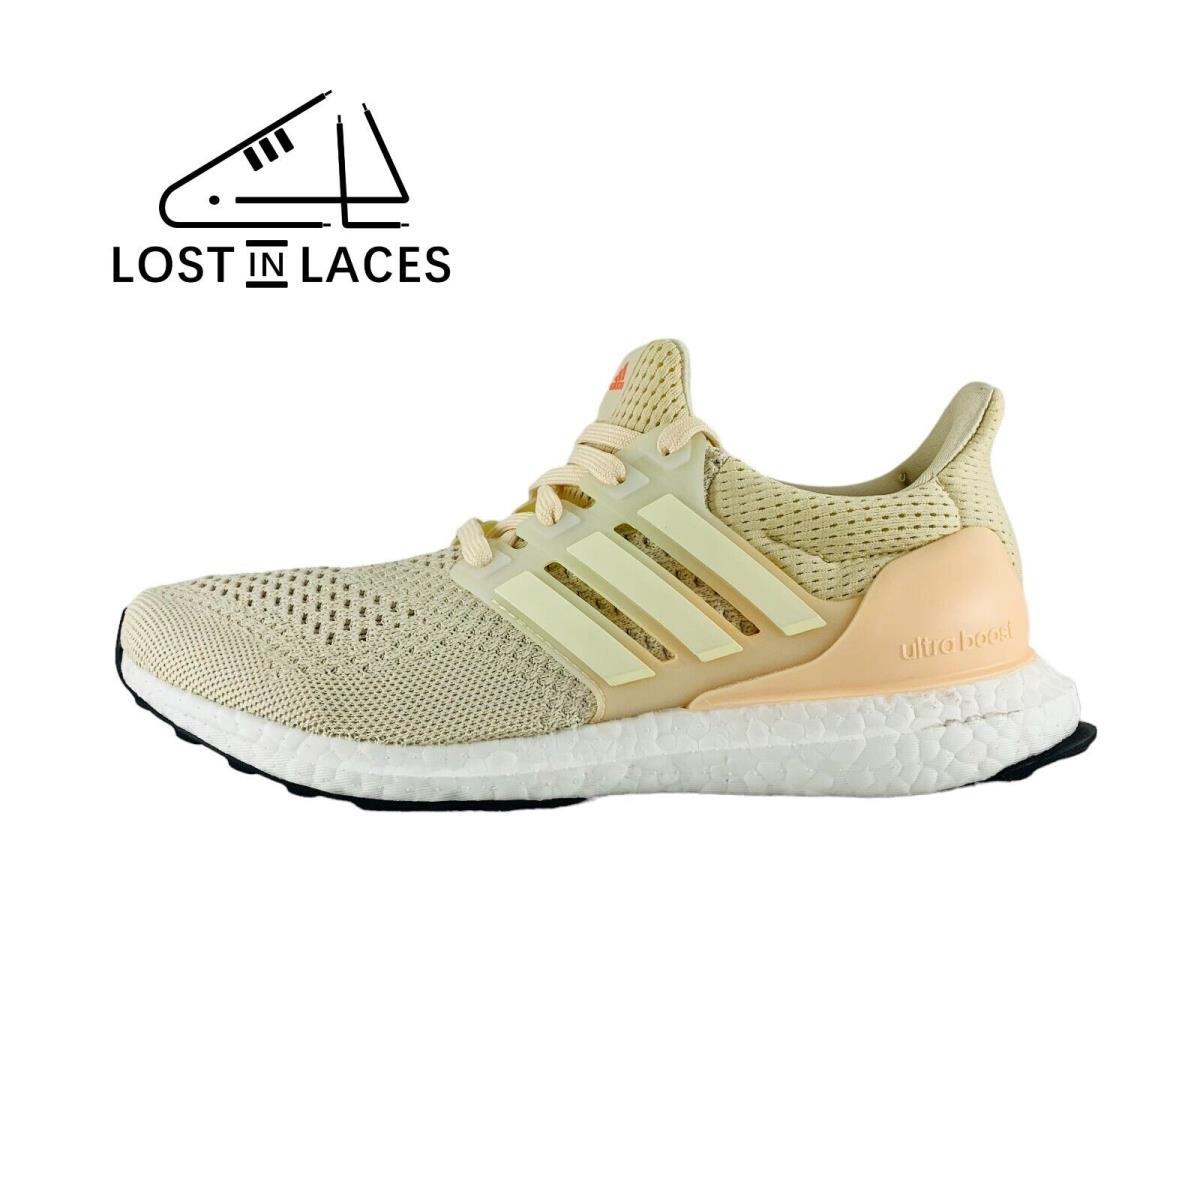 Adidas Ultraboost 1.0 Ecru Tint Coral Sneakers Running Shoes Women`s Sizes